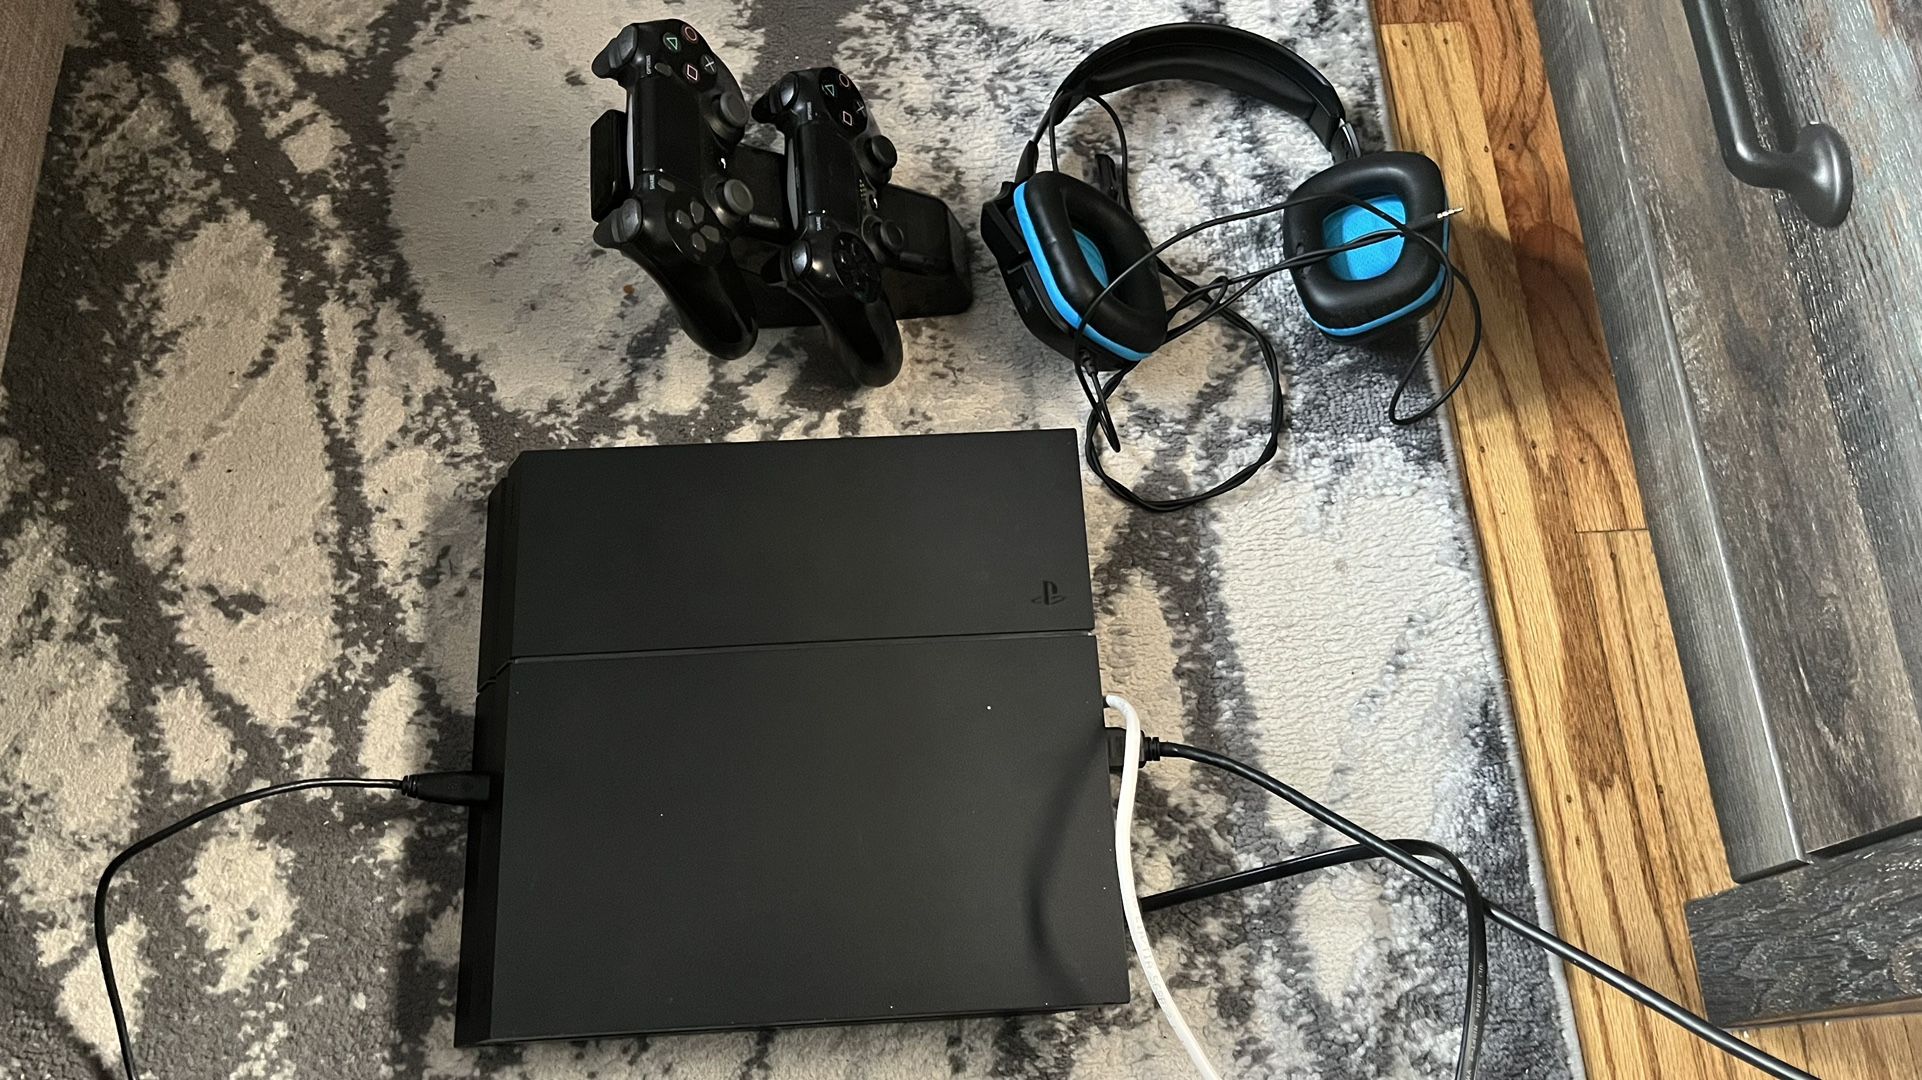 PS4 w/ controllers and headset.